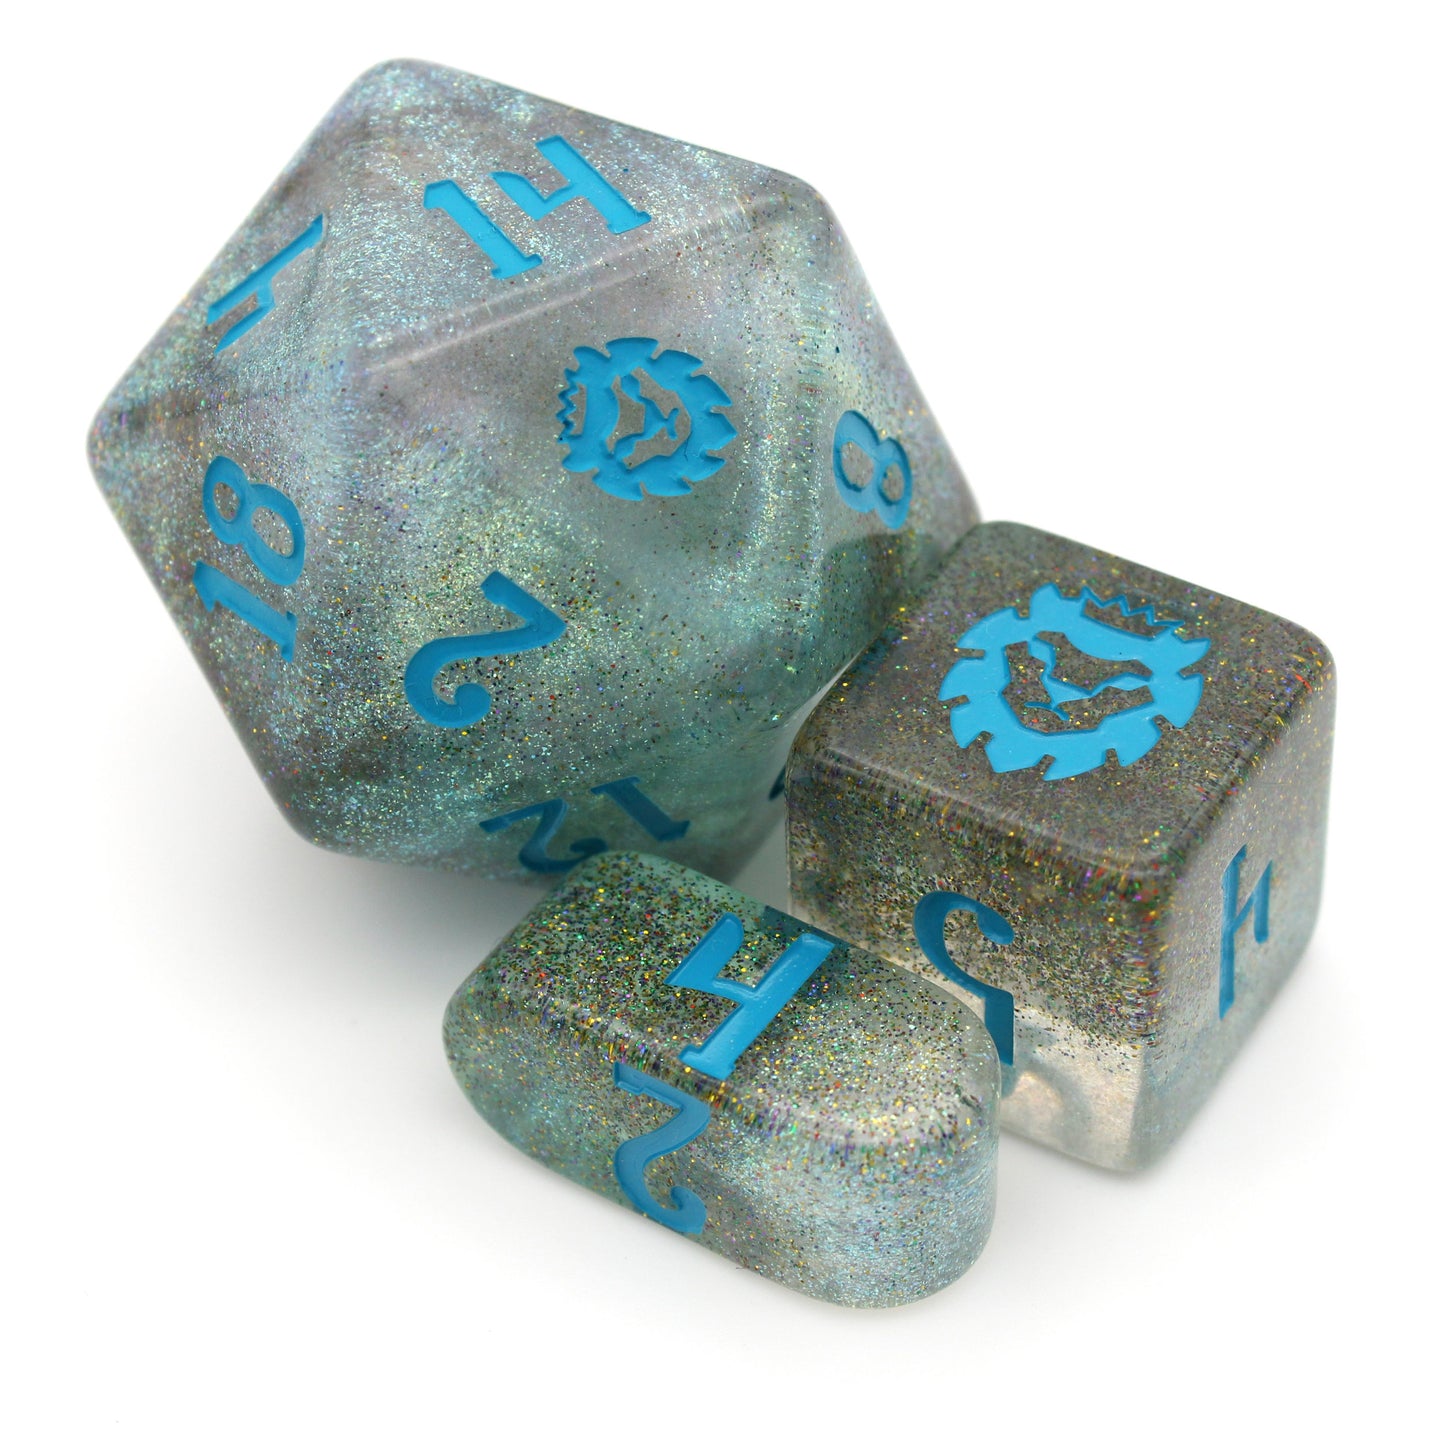 A closeup on a chonky d20, d6, and infinity d4 from River Magic, a 10-piece dice set of swirling blue, brown, and clear resin, shot through with silver glitter and inked in teal.